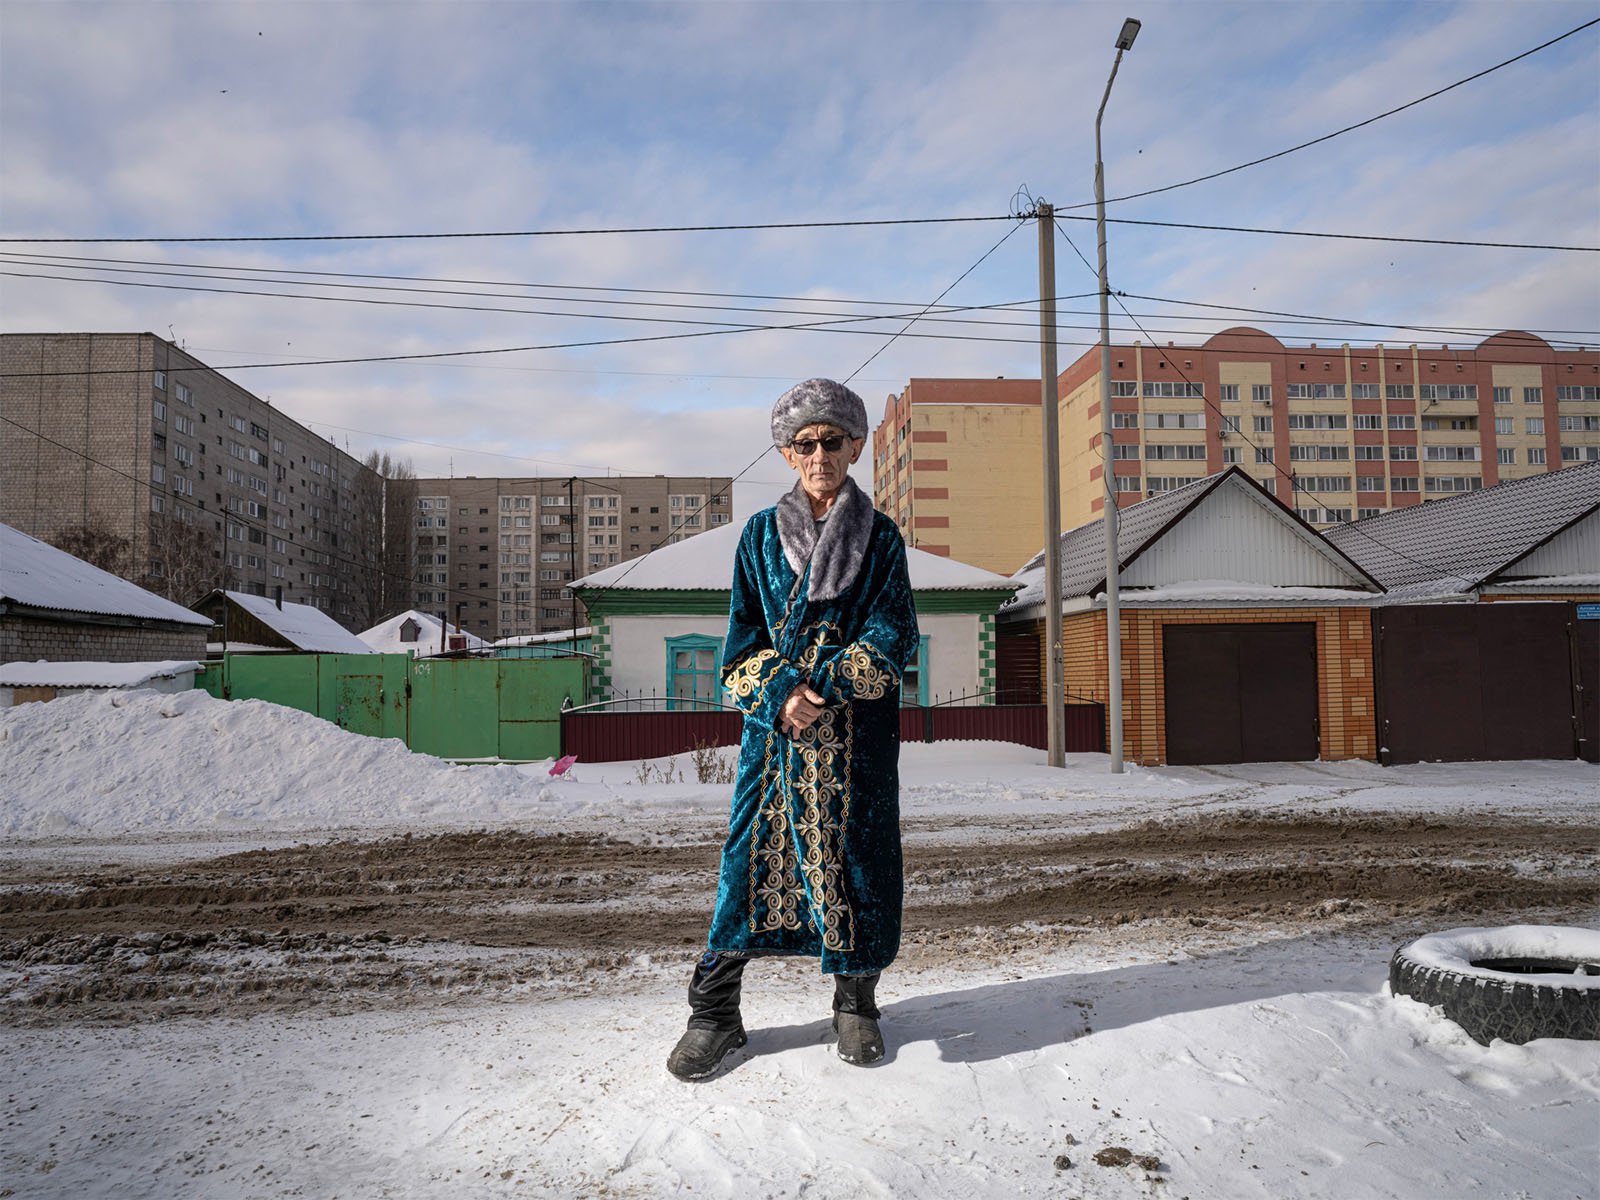 An elderly woman dressed in a traditional robe and hat stands confidently on a snowy street, with colorful apartment buildings in the background under a partly cloudy sky.